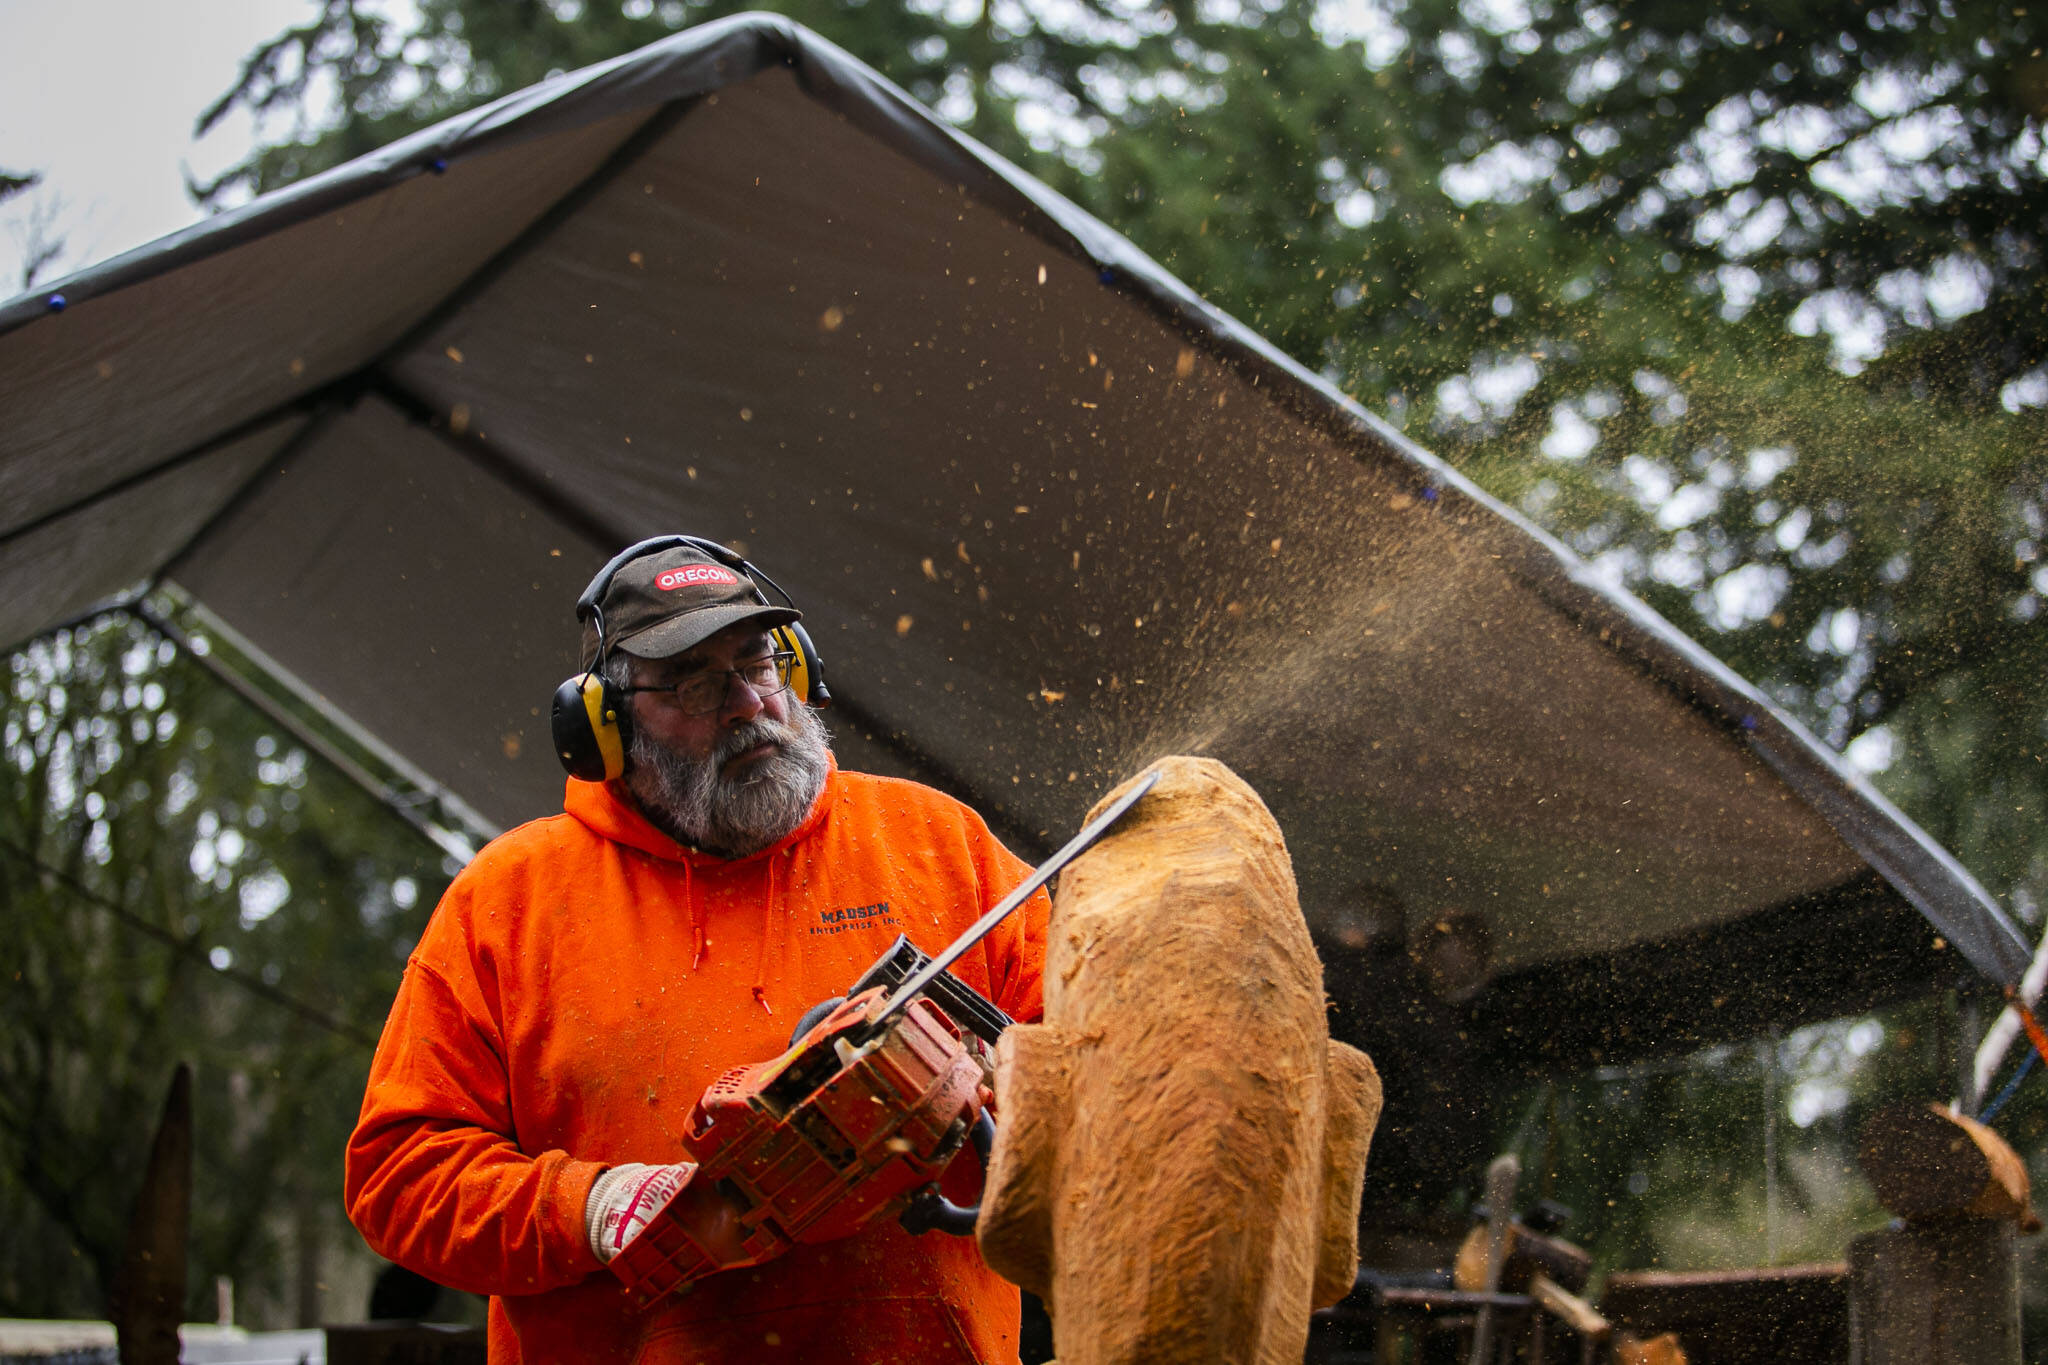 Flakes of wood and sawdust spray in different directions while Steve Backus works on the details of a moon carving. (Olivia Vanni / The Herald)